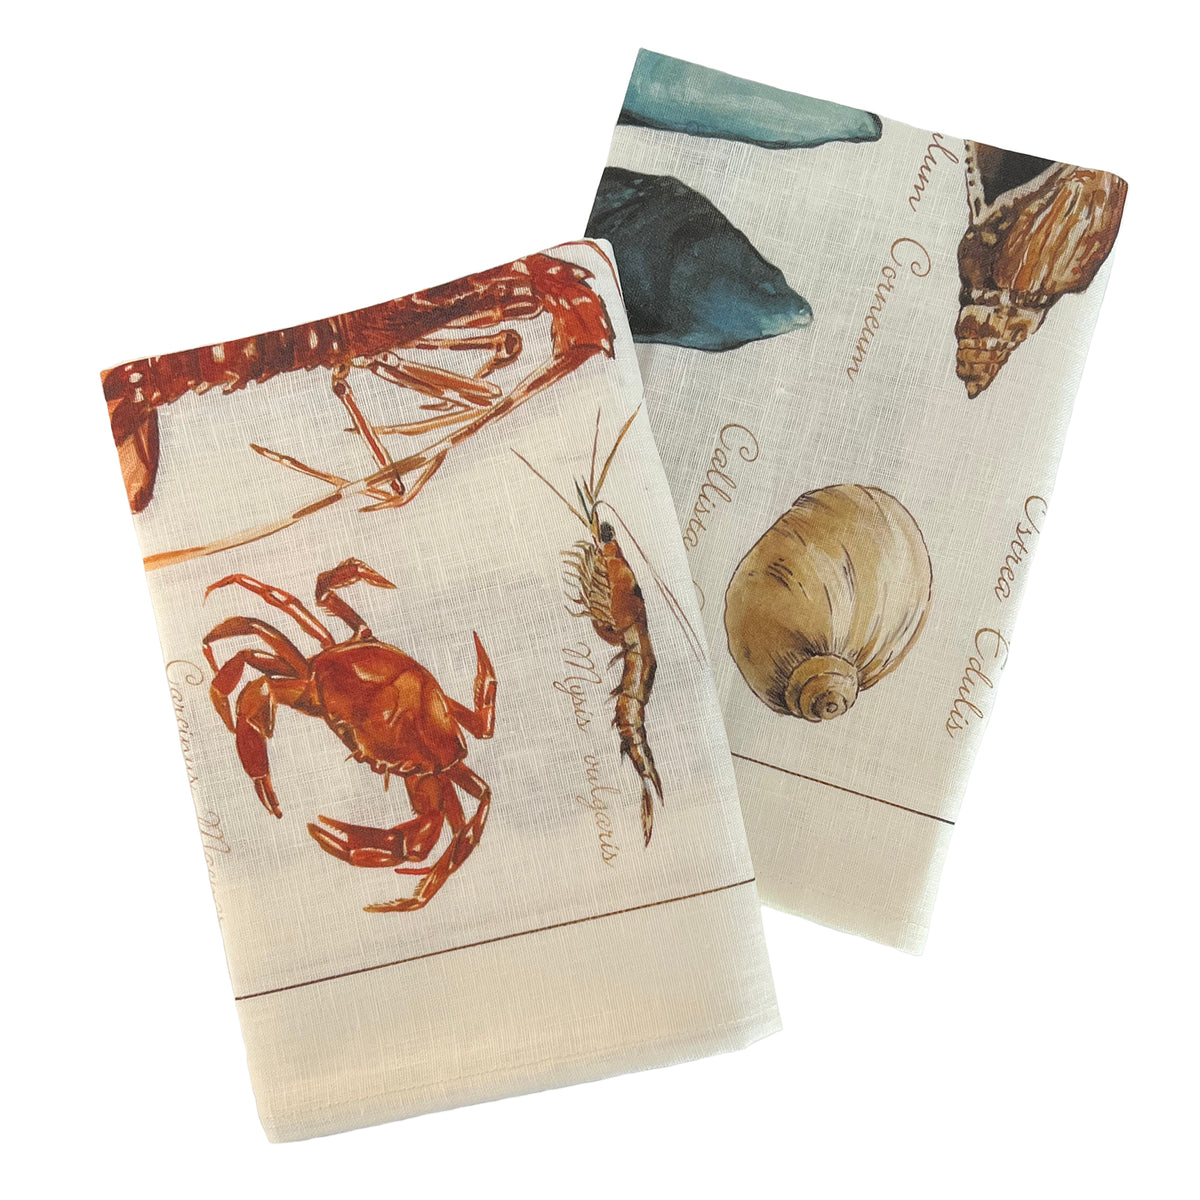 Shoreline mixed Kitchen Towels set with Coastal Shells and Crustaceans in Italian Linen from Caskata